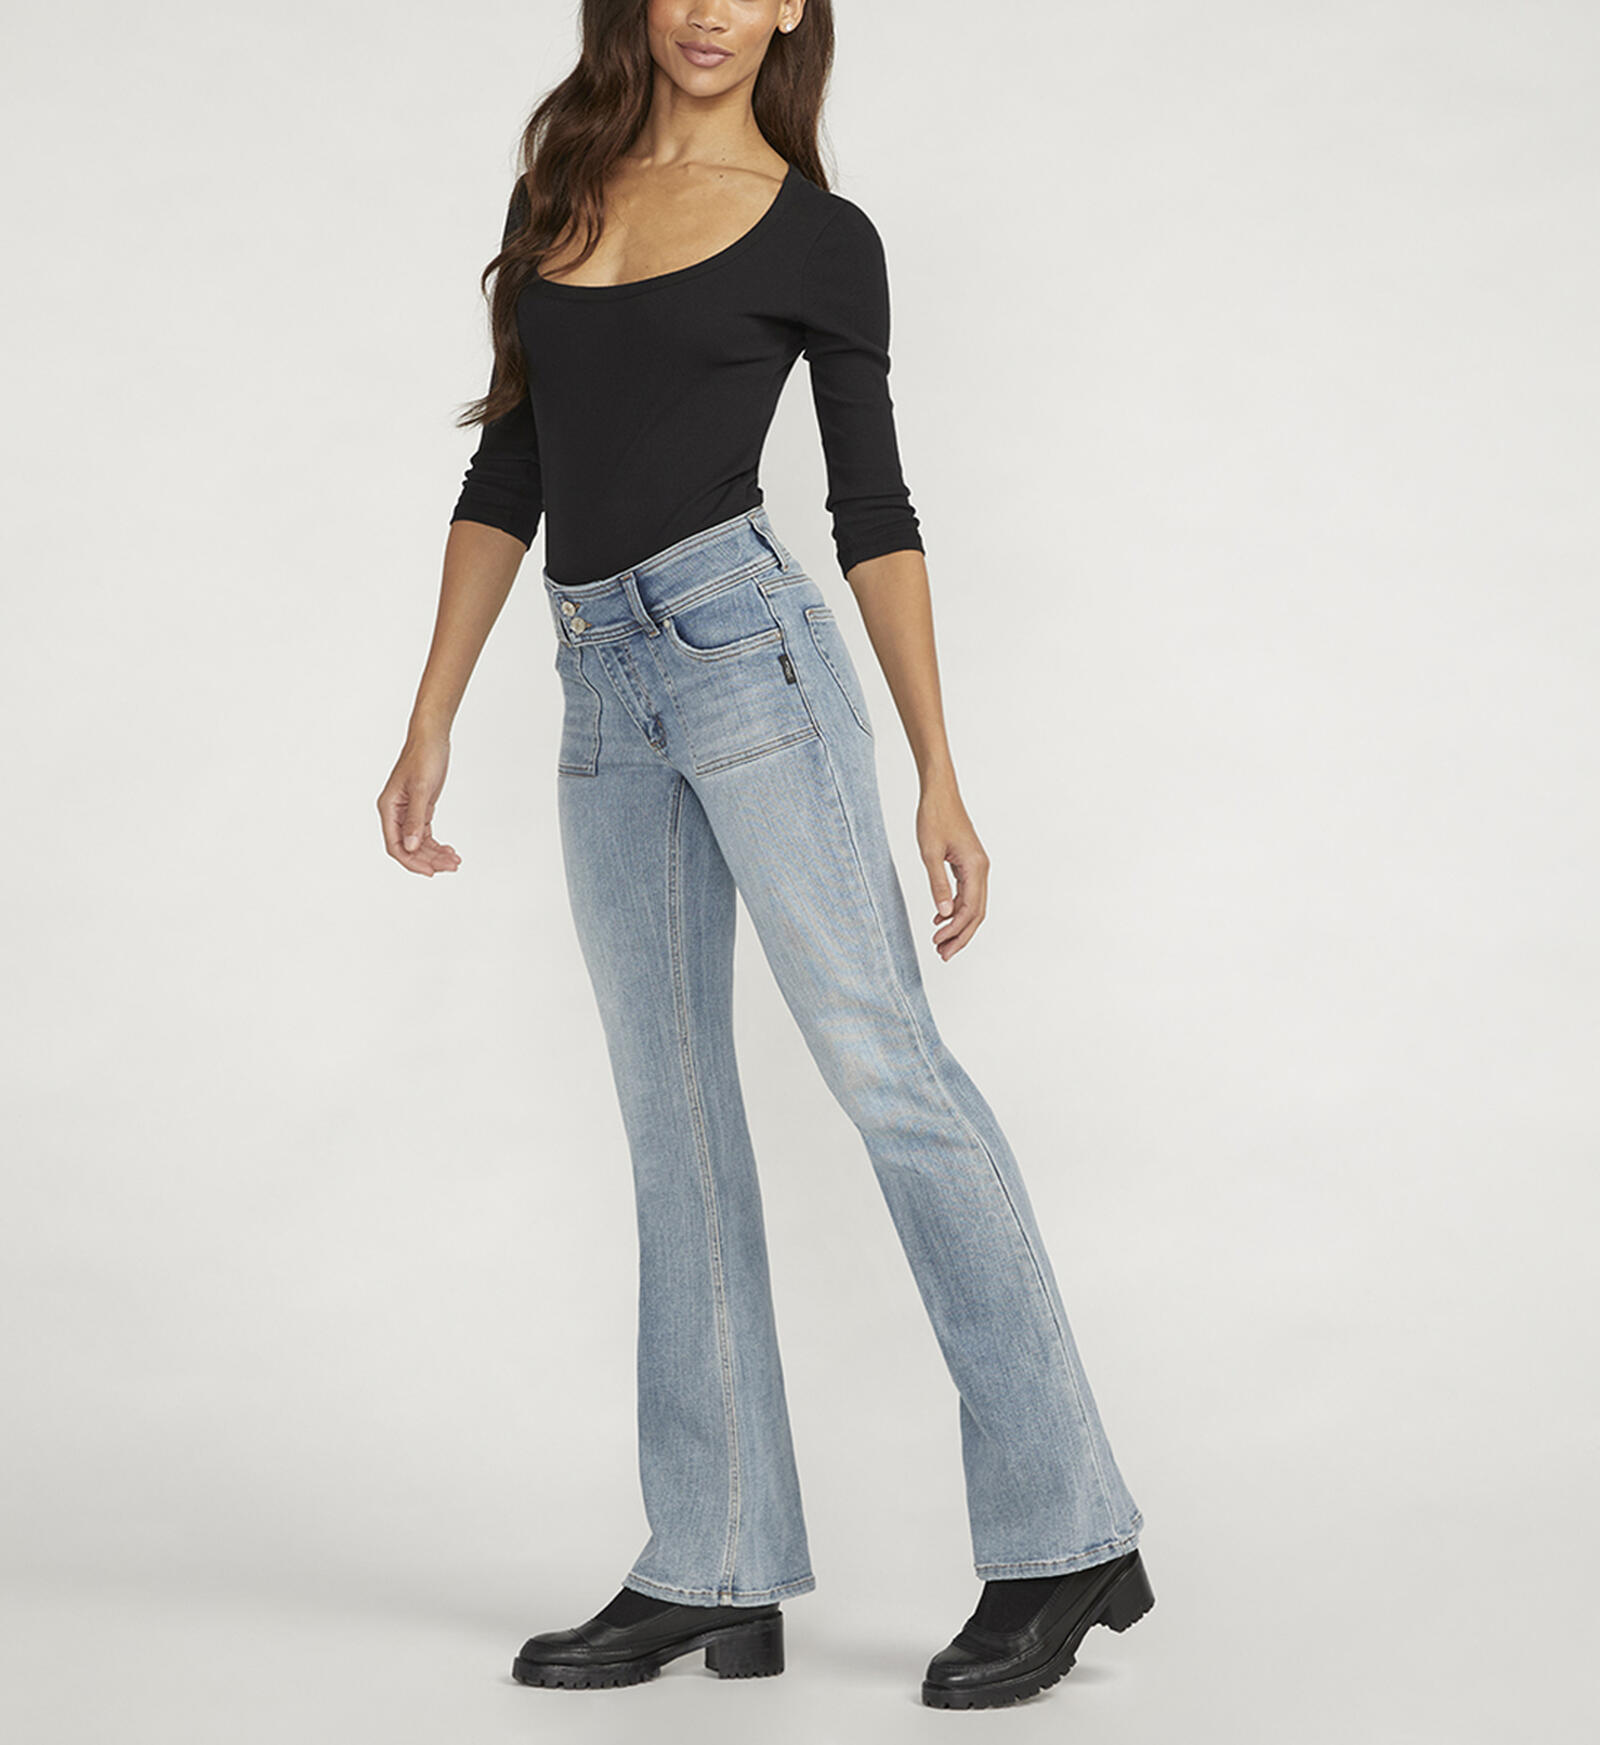 Style Low Rise Flare Jeans, Low Rise Flare Jeans Womens